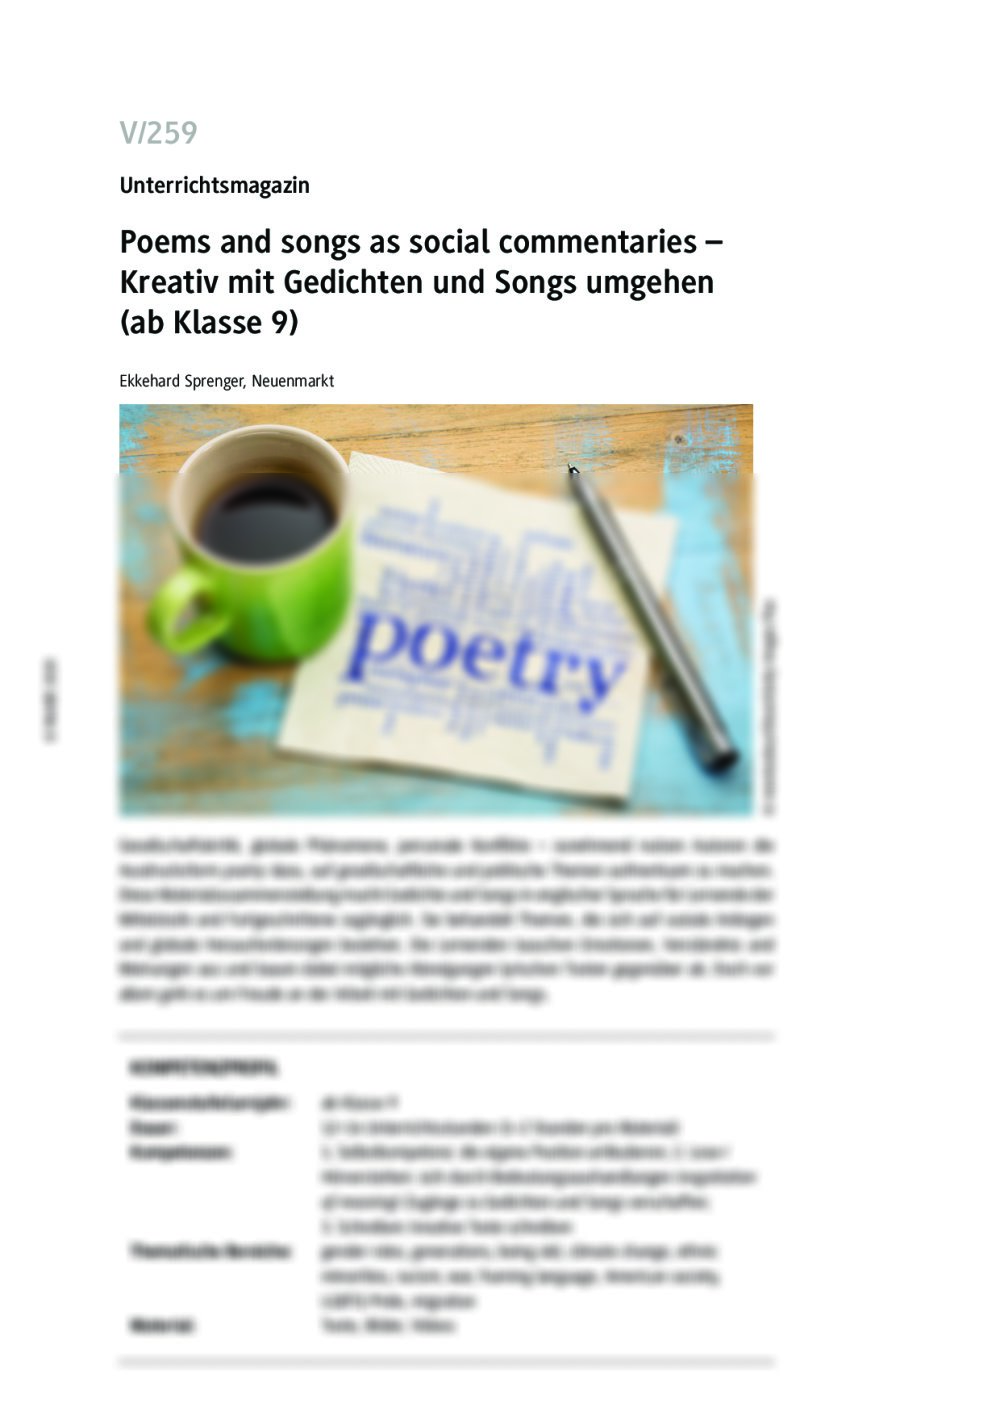 Poems and songs as social commentaries - Seite 1